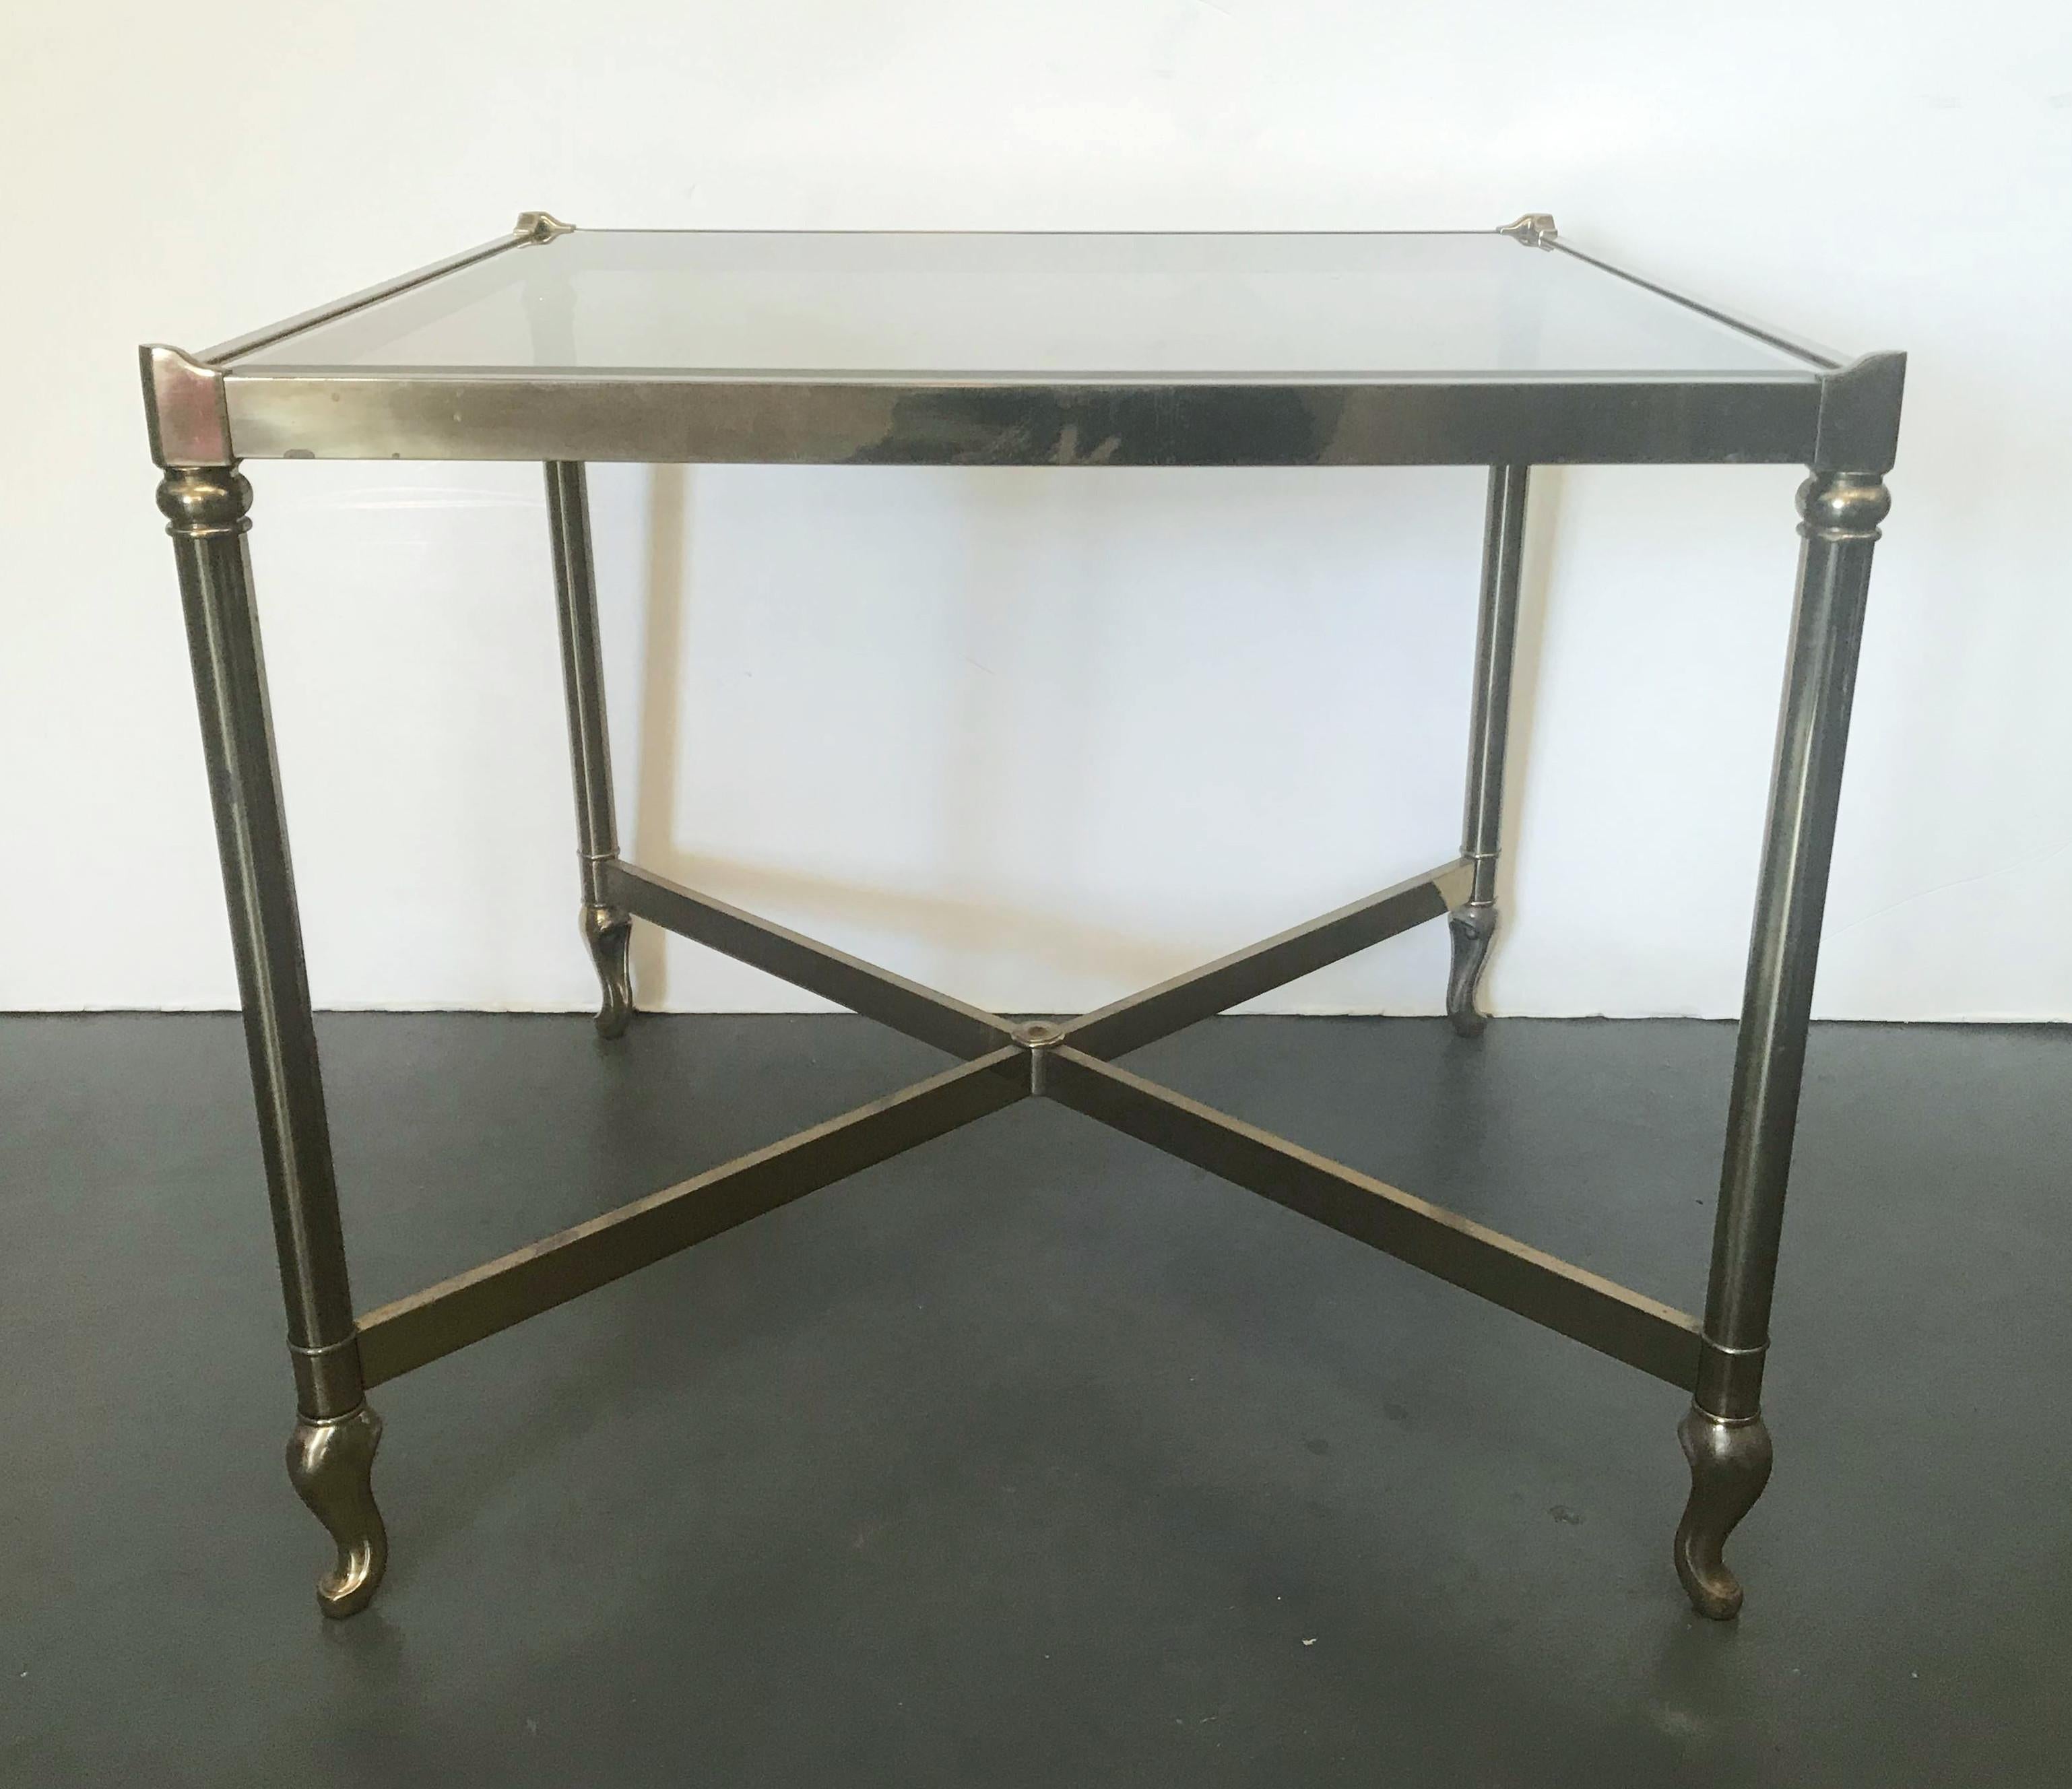 Vintage square side table made of solid brass frame with smoky beveled glass top, made in the USA, circa 1970s
Measures: Length 27 inches, width 27 inches, height 23.5 inches
1 available in stock in Palm Springs ON FINAL CLEARANCE SALE for $1,199